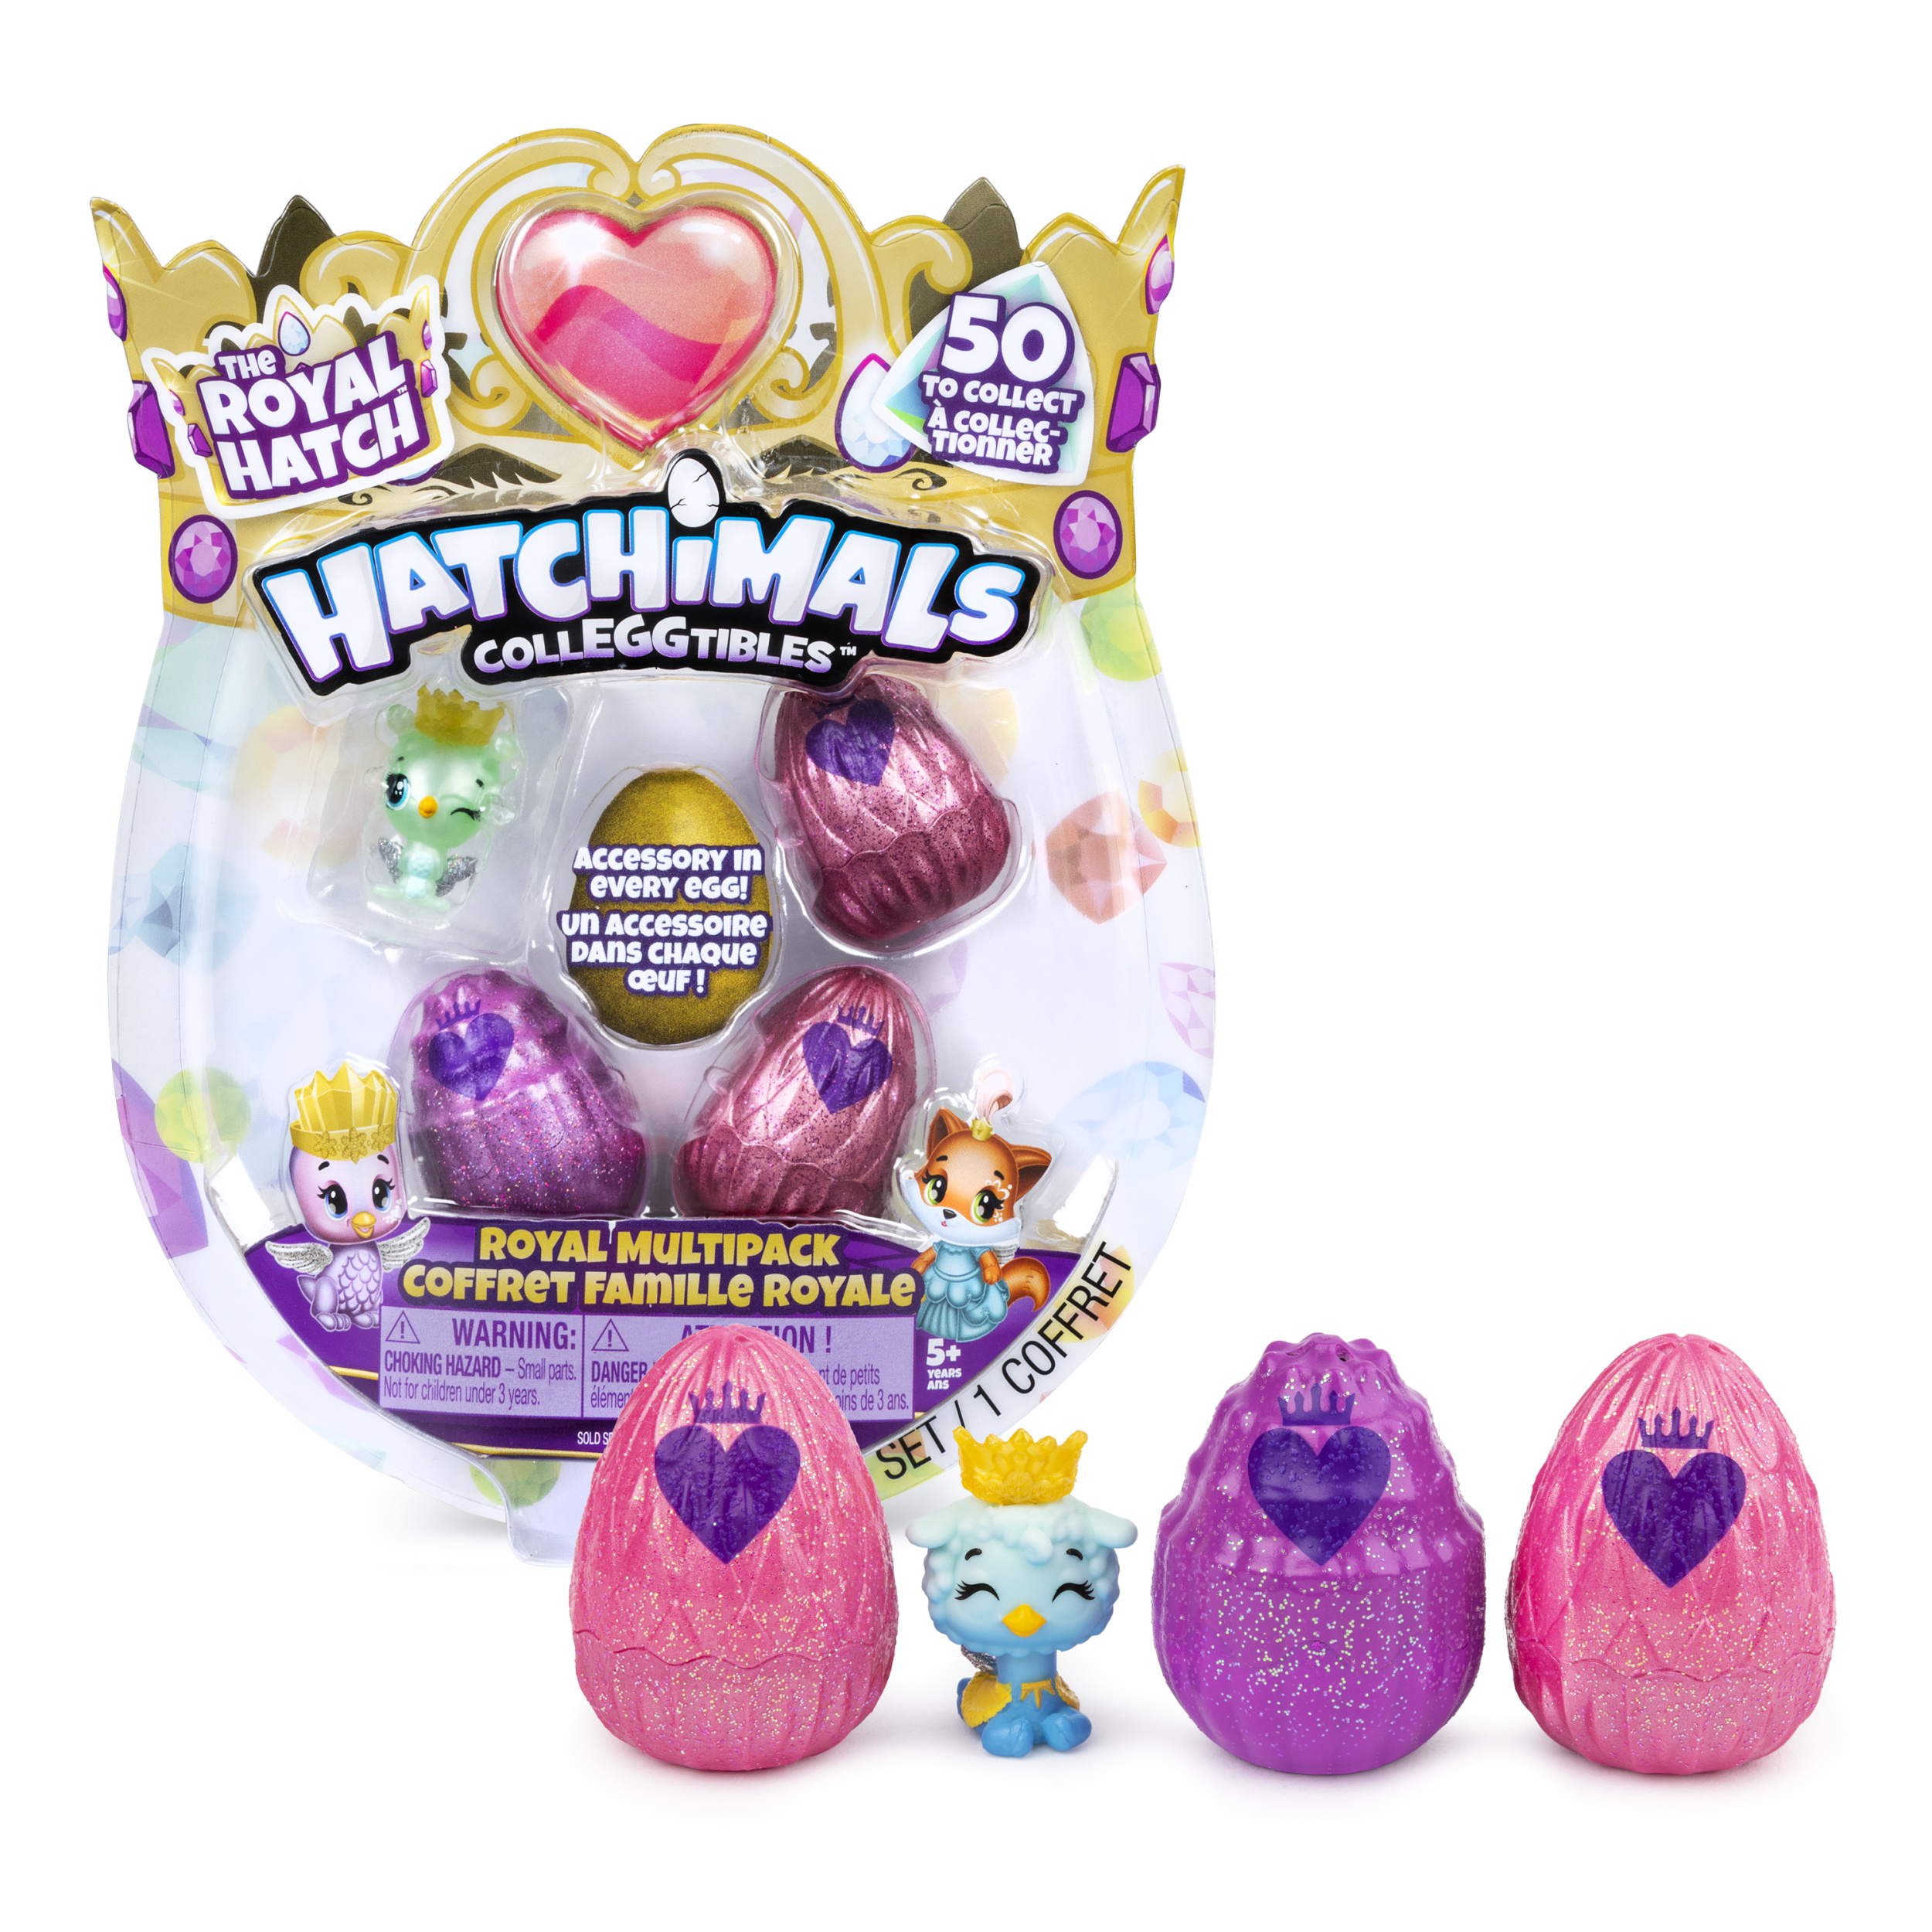 Hatchimals CollEGGtibles, Royal Multipack with 4 Hatchimals and Accessories, for Kids Aged 5 and up (Styles May Vary) - image 2 of 8